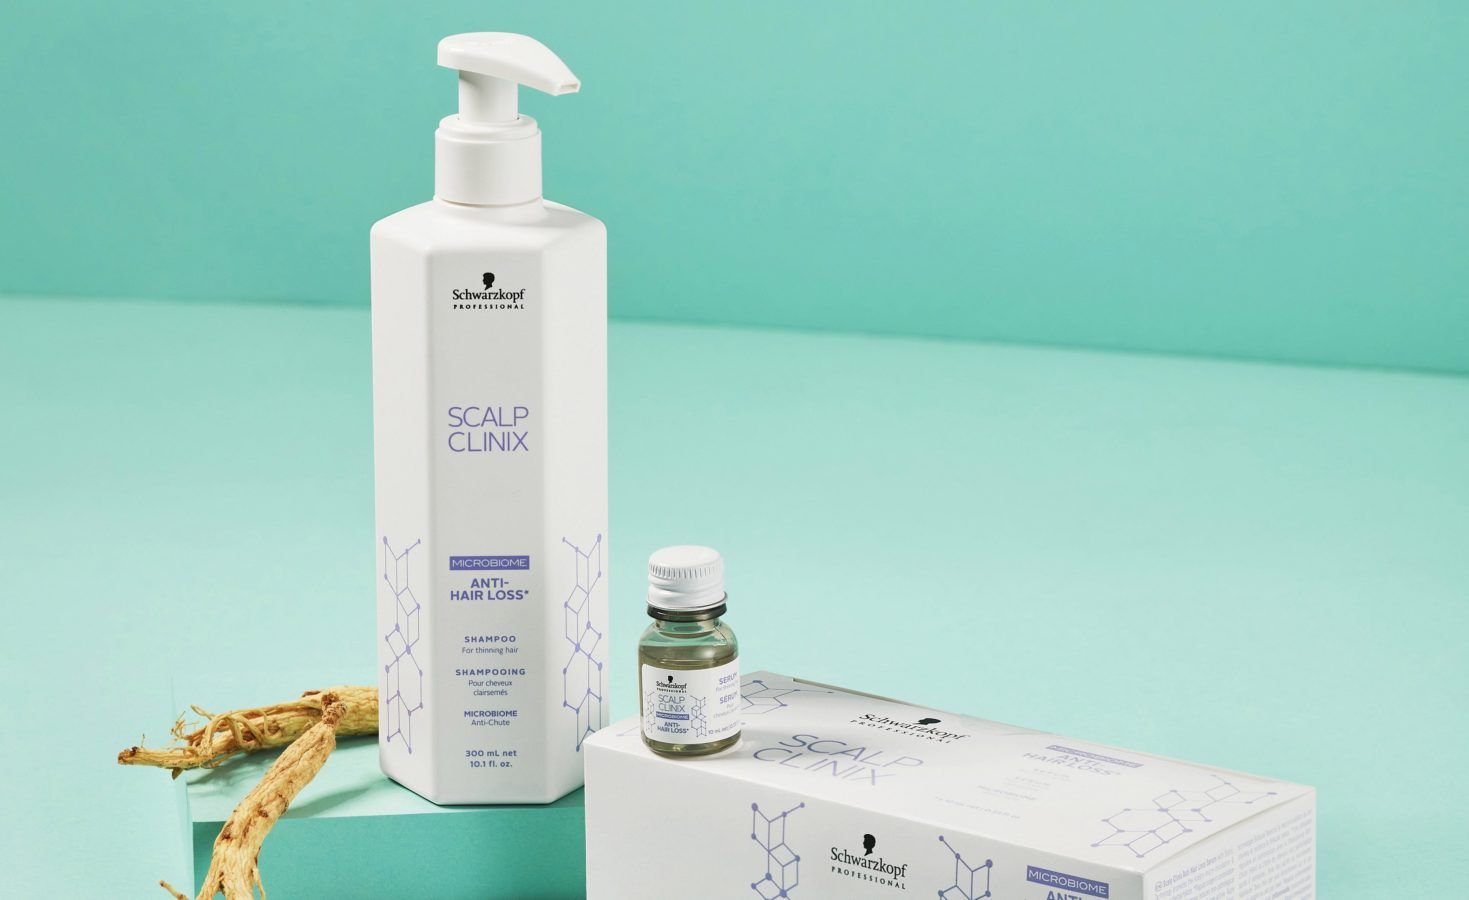 Schwarzkopf Professional's 'Scalp Clinix' tackles the root of hair problems